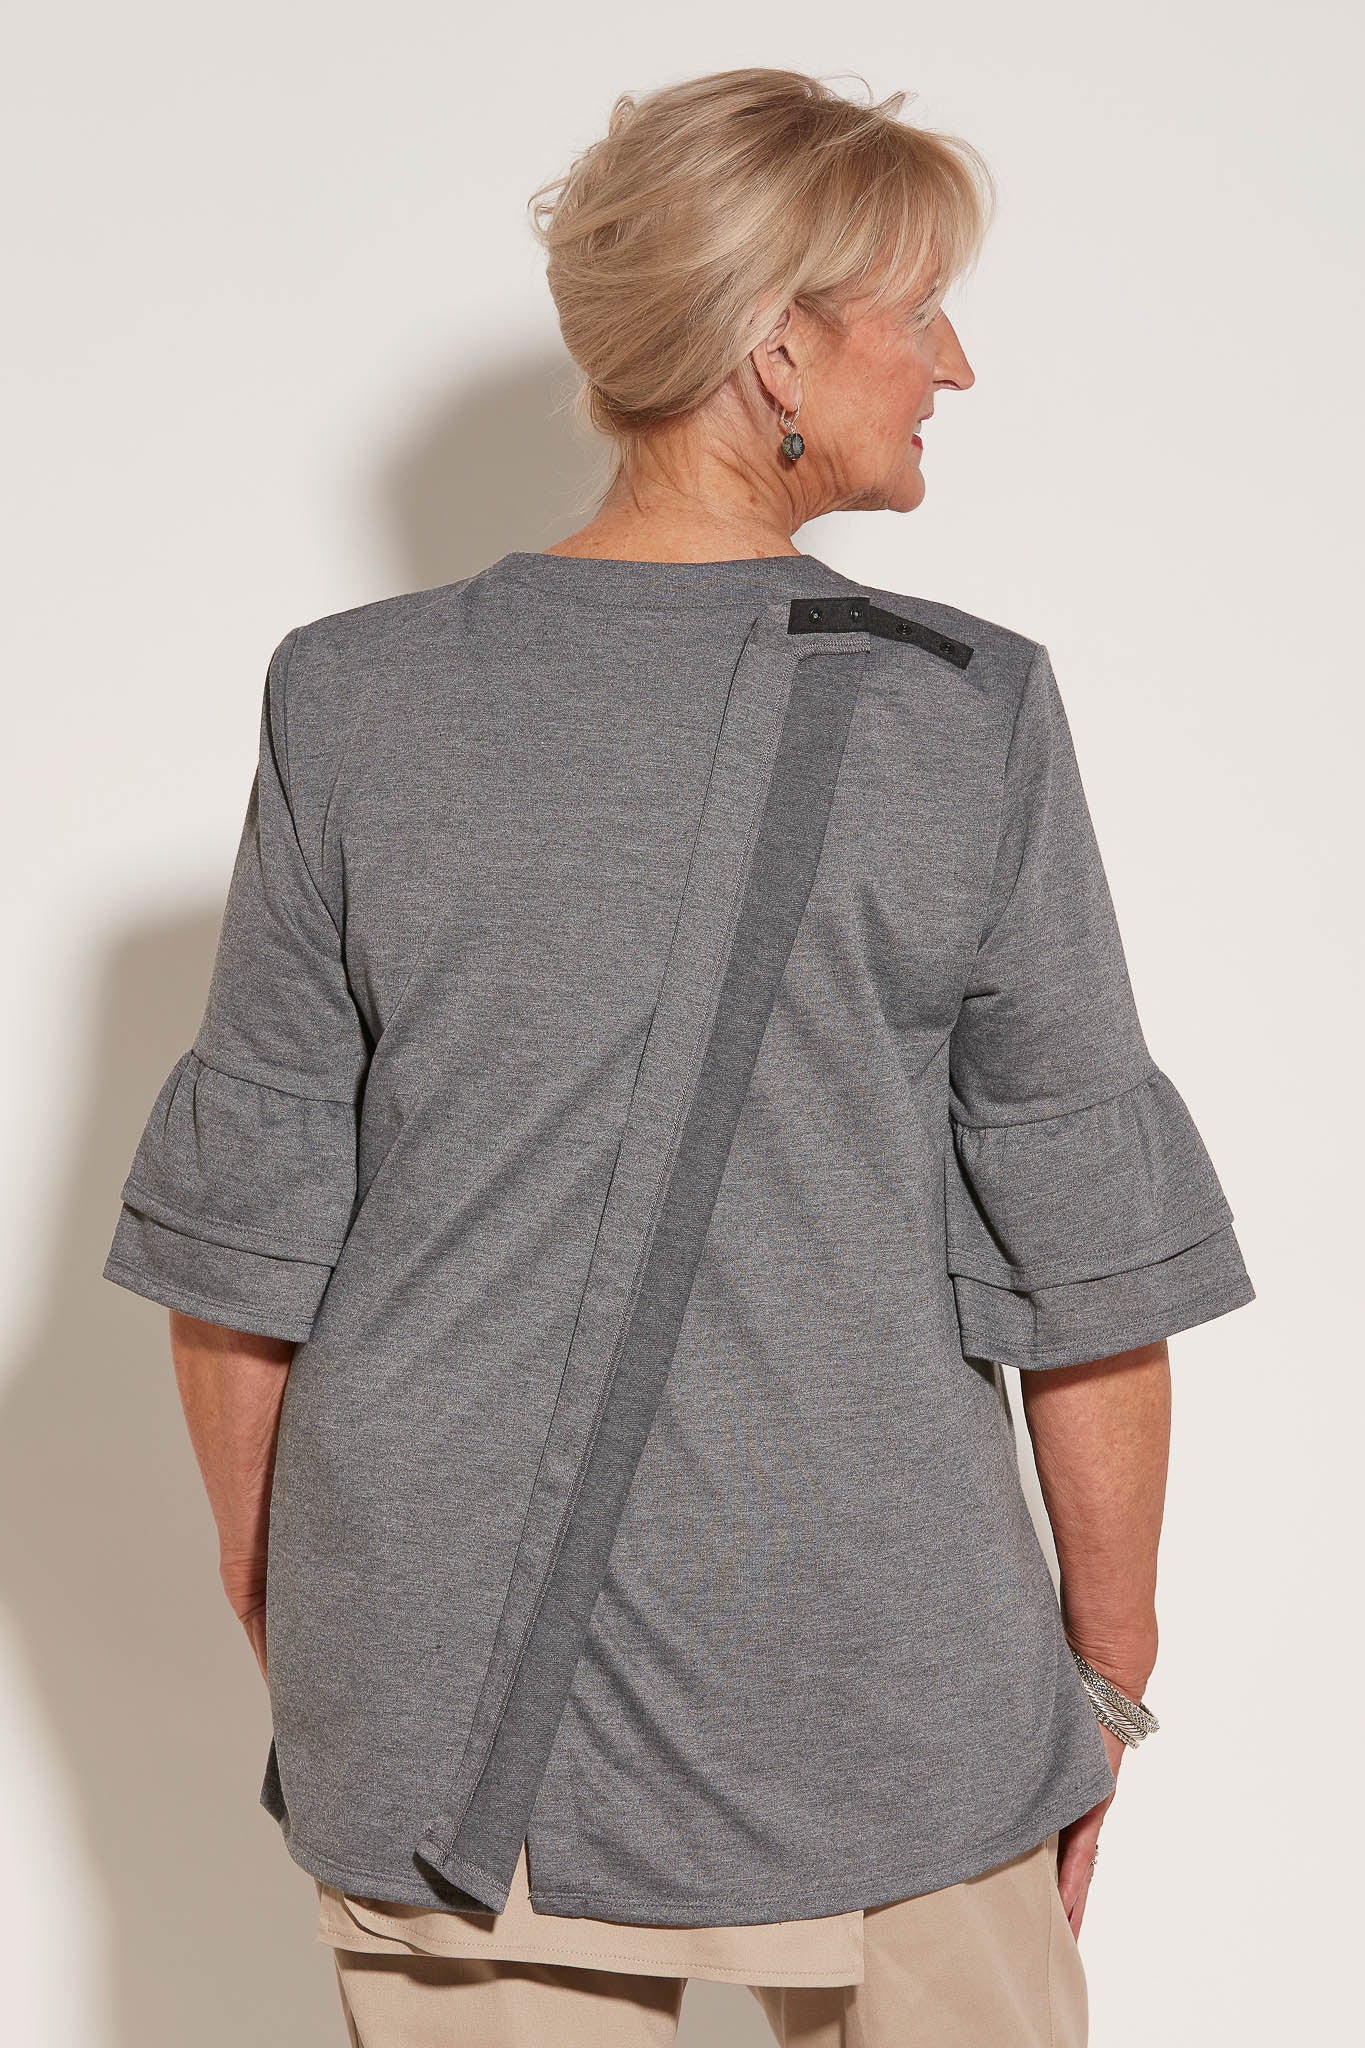 Assisted Dressing Adaptive Top for Women | Art in Aging